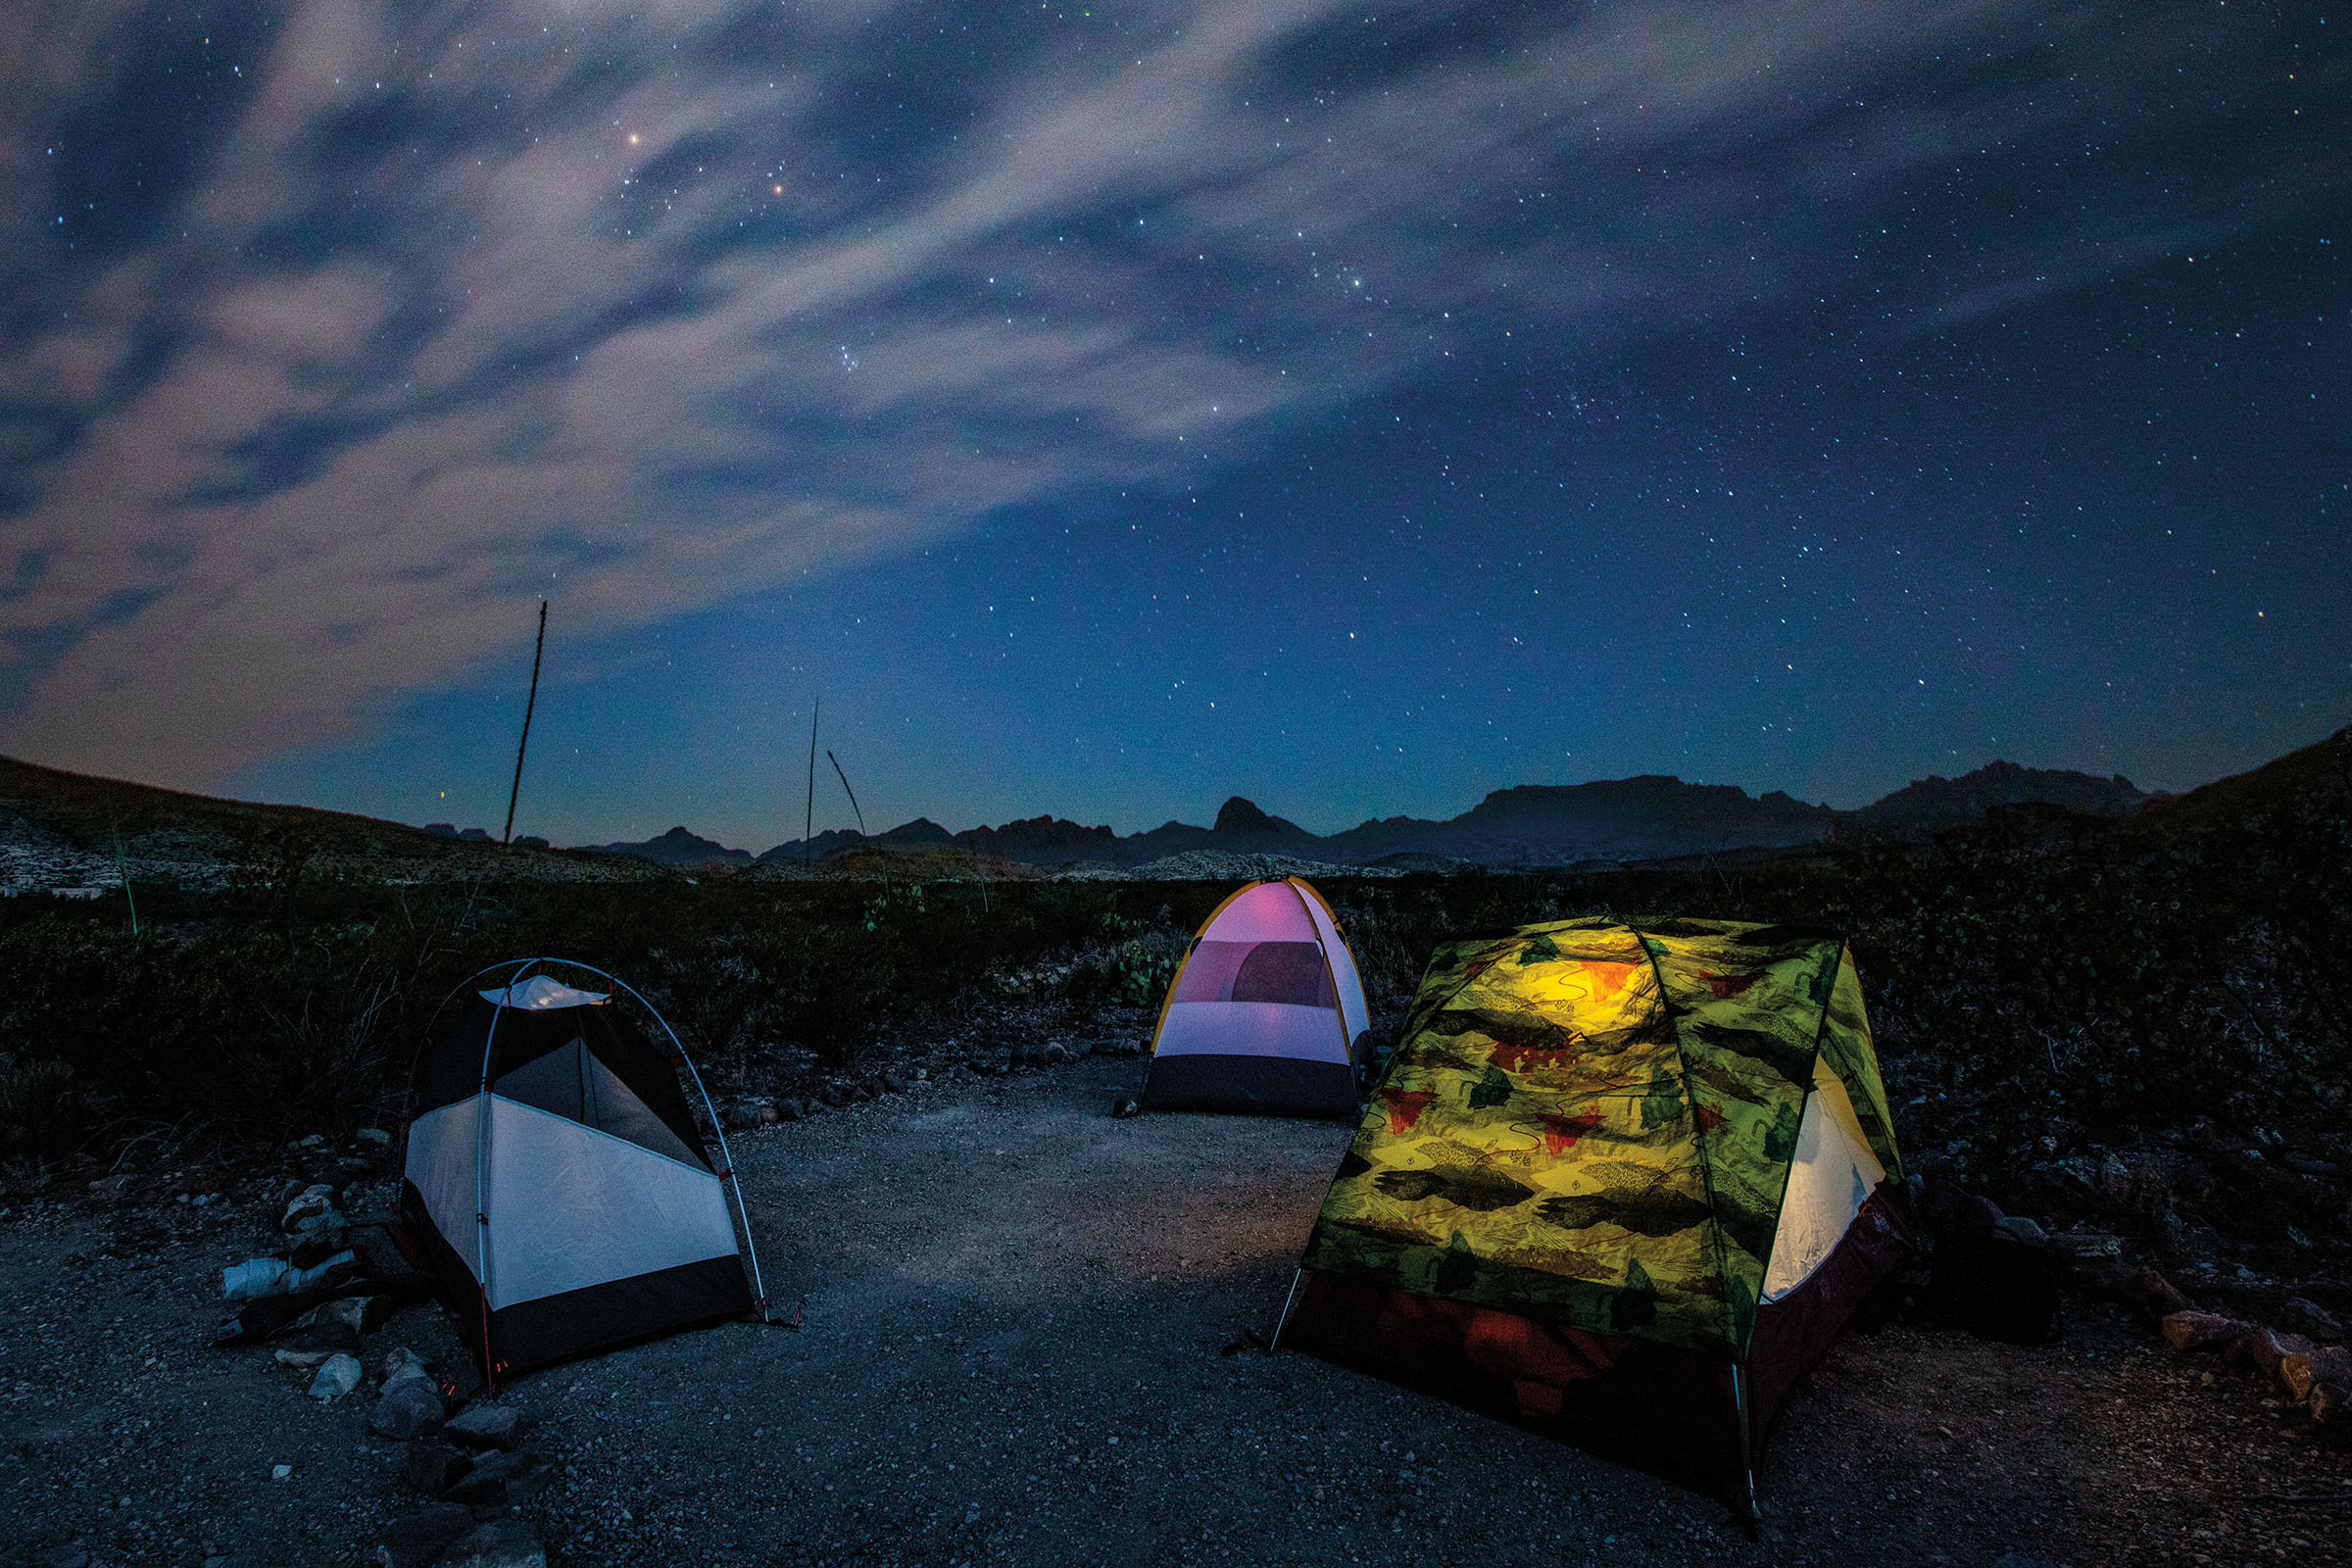 A picture of tents under the night sky at Fresno Camp in Big Bend National Park